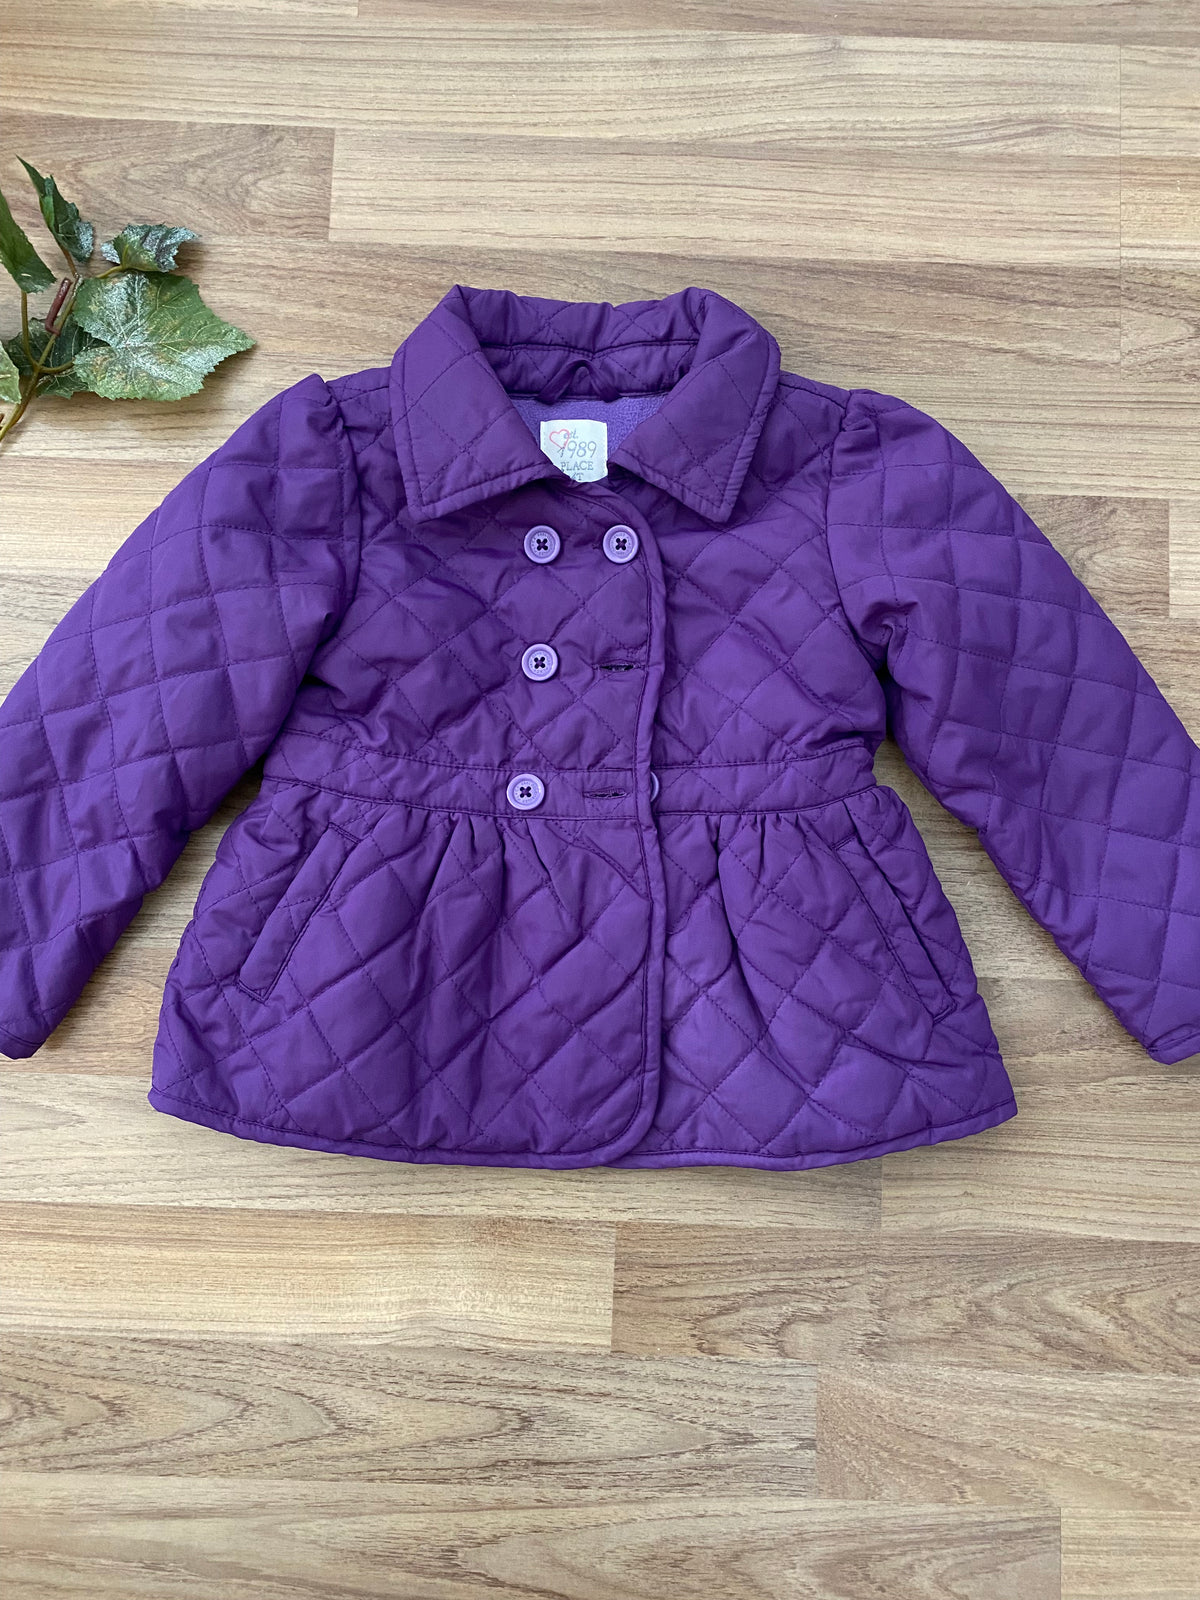 Button Up Coat (Girls Size 4)